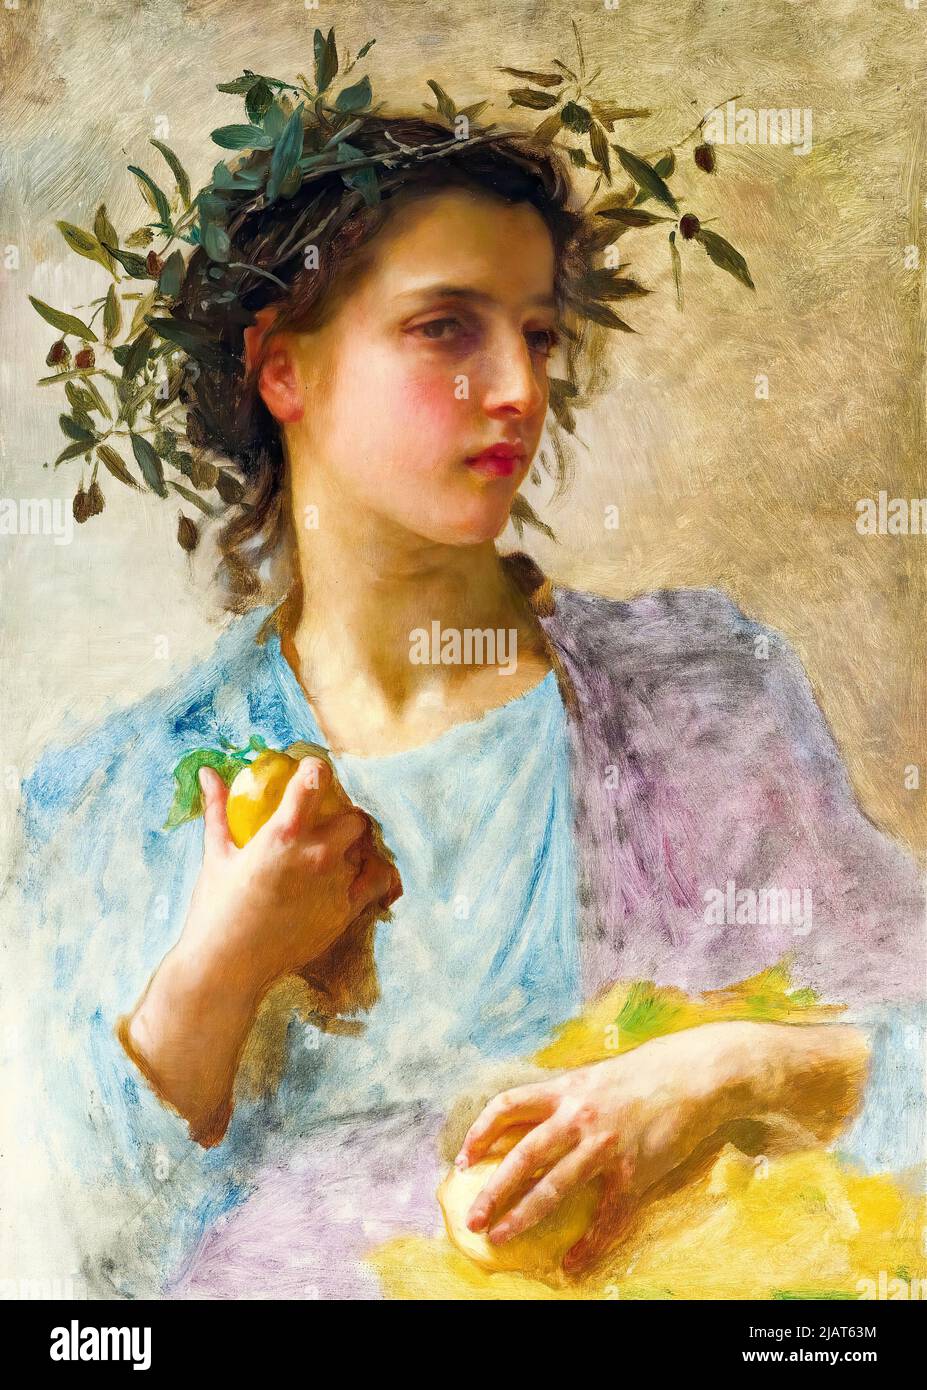 William Adolphe Bouguereau, L’été, (Summer), painting in oil on canvas, 1880 Stock Photo